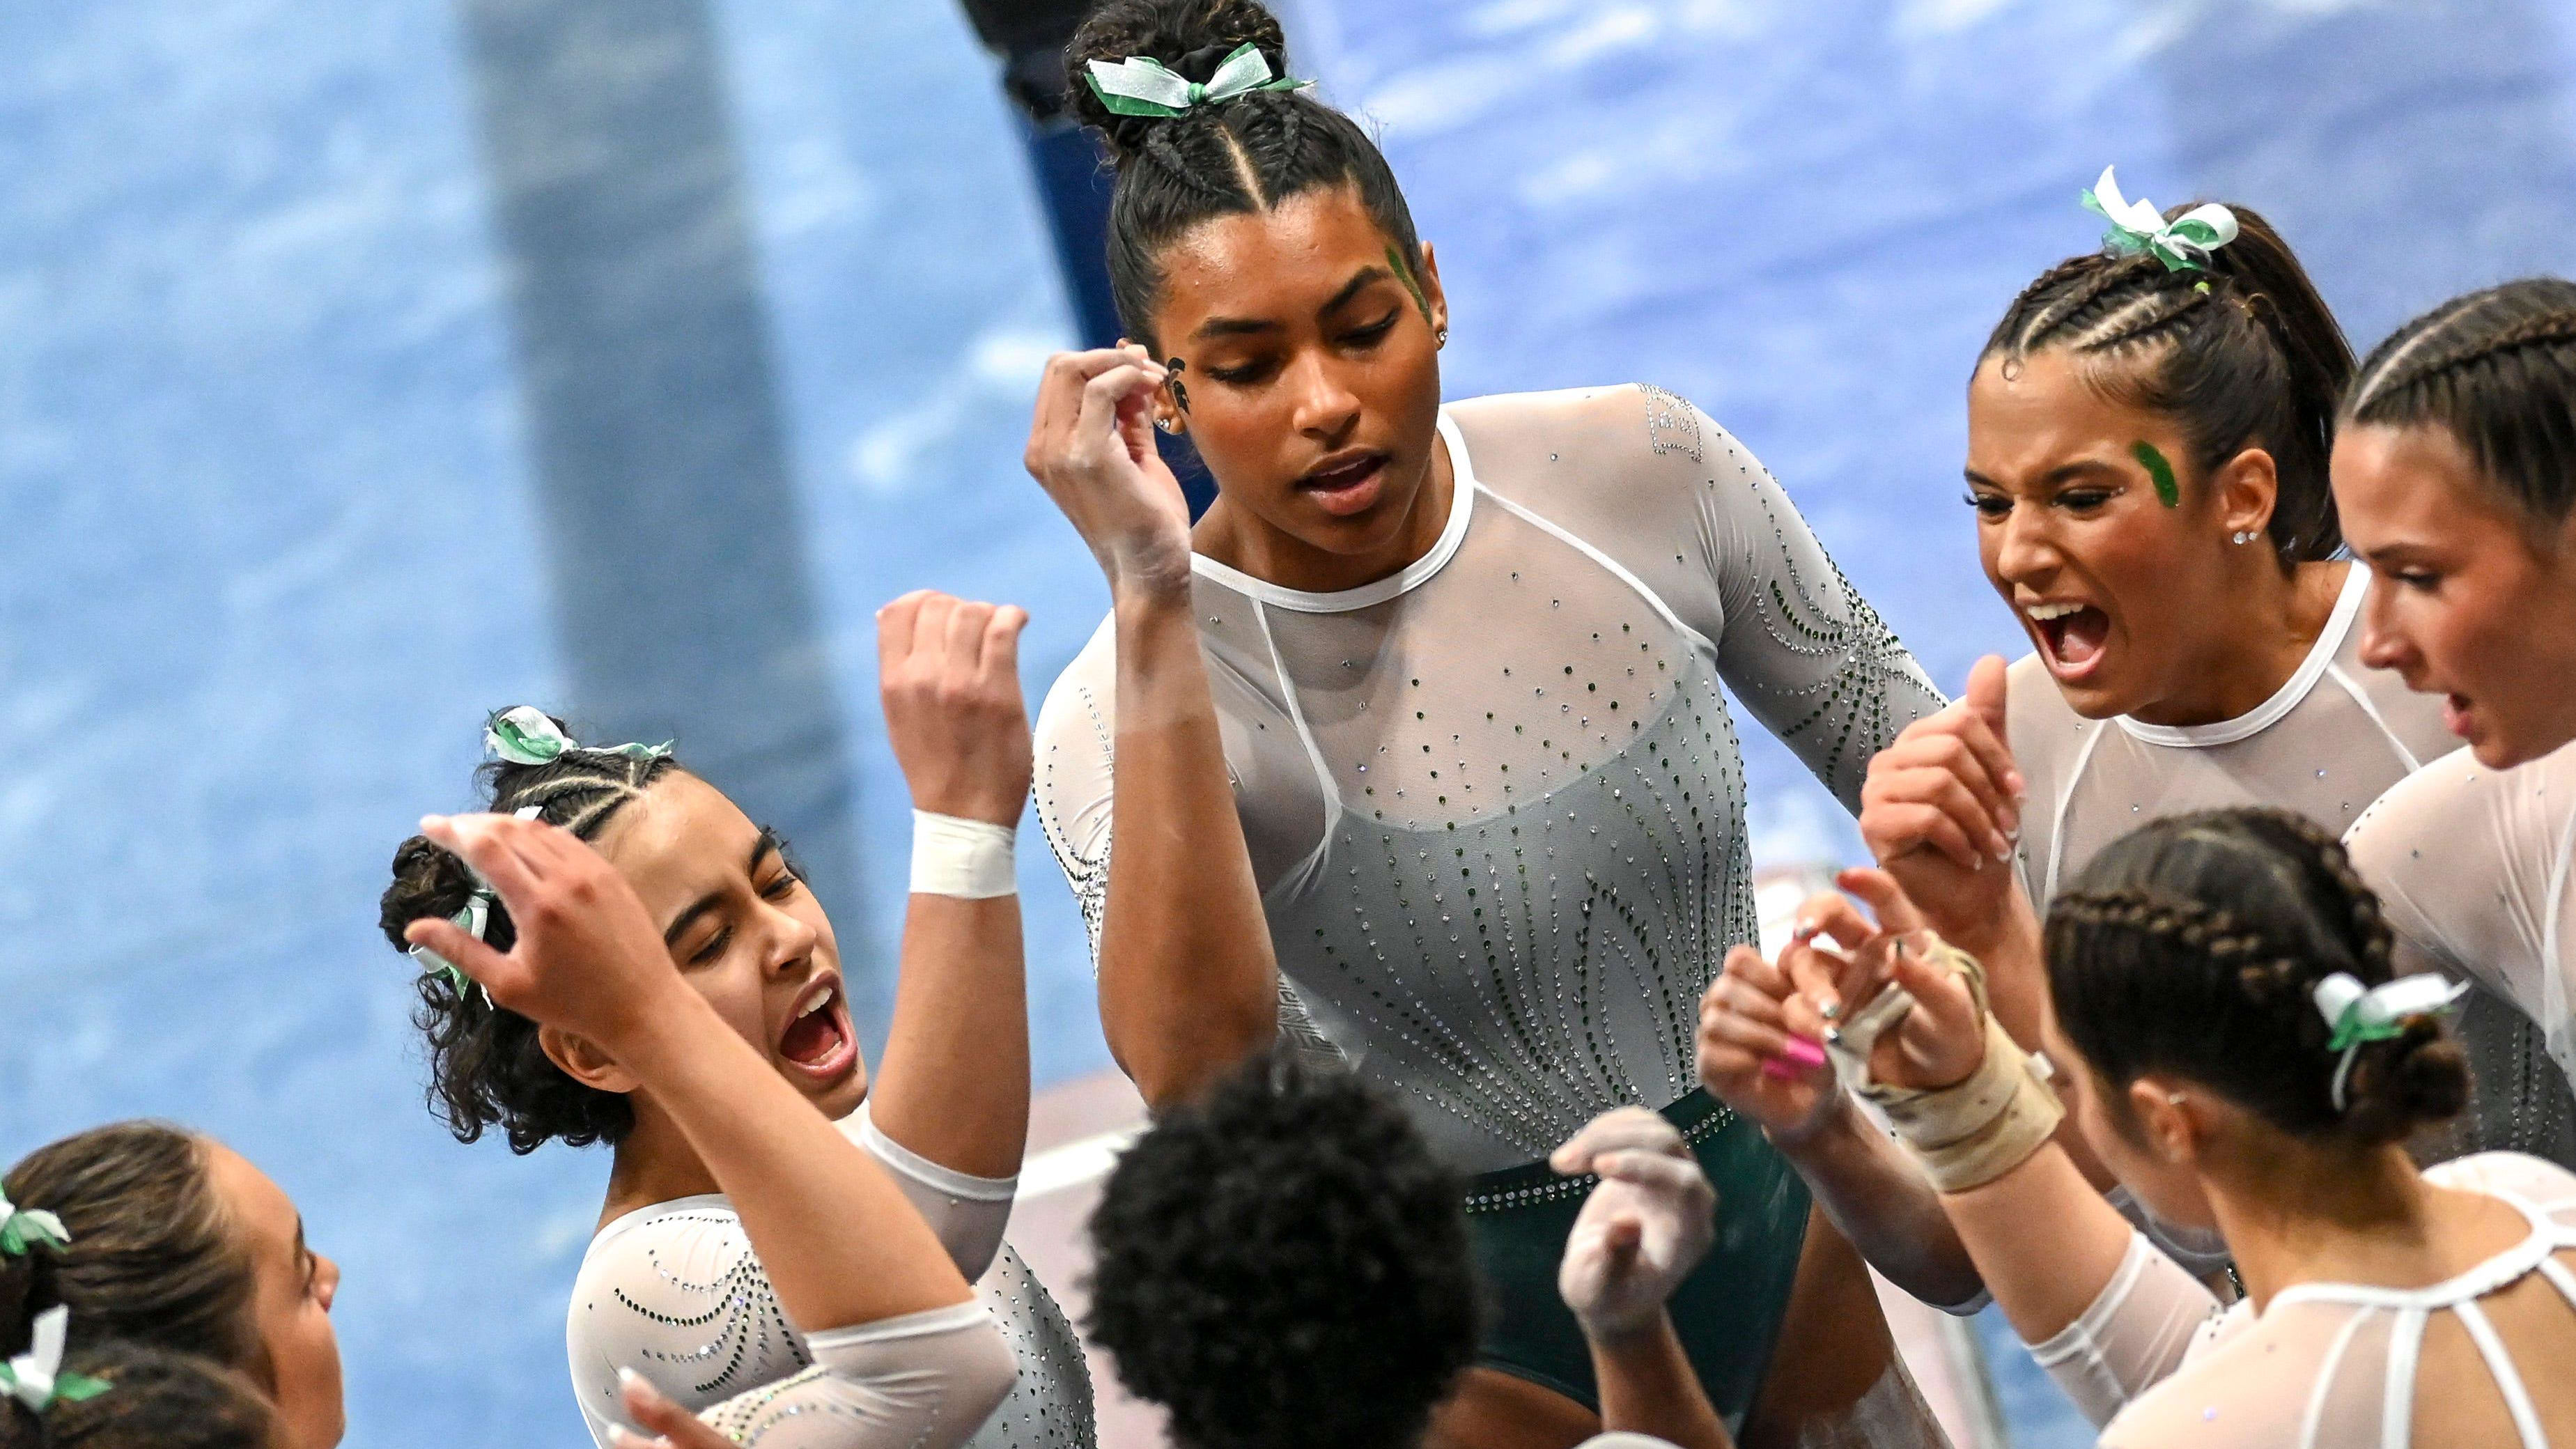 Michigan State Gymnastics Qualifies for NCAA Championships After Historic Win